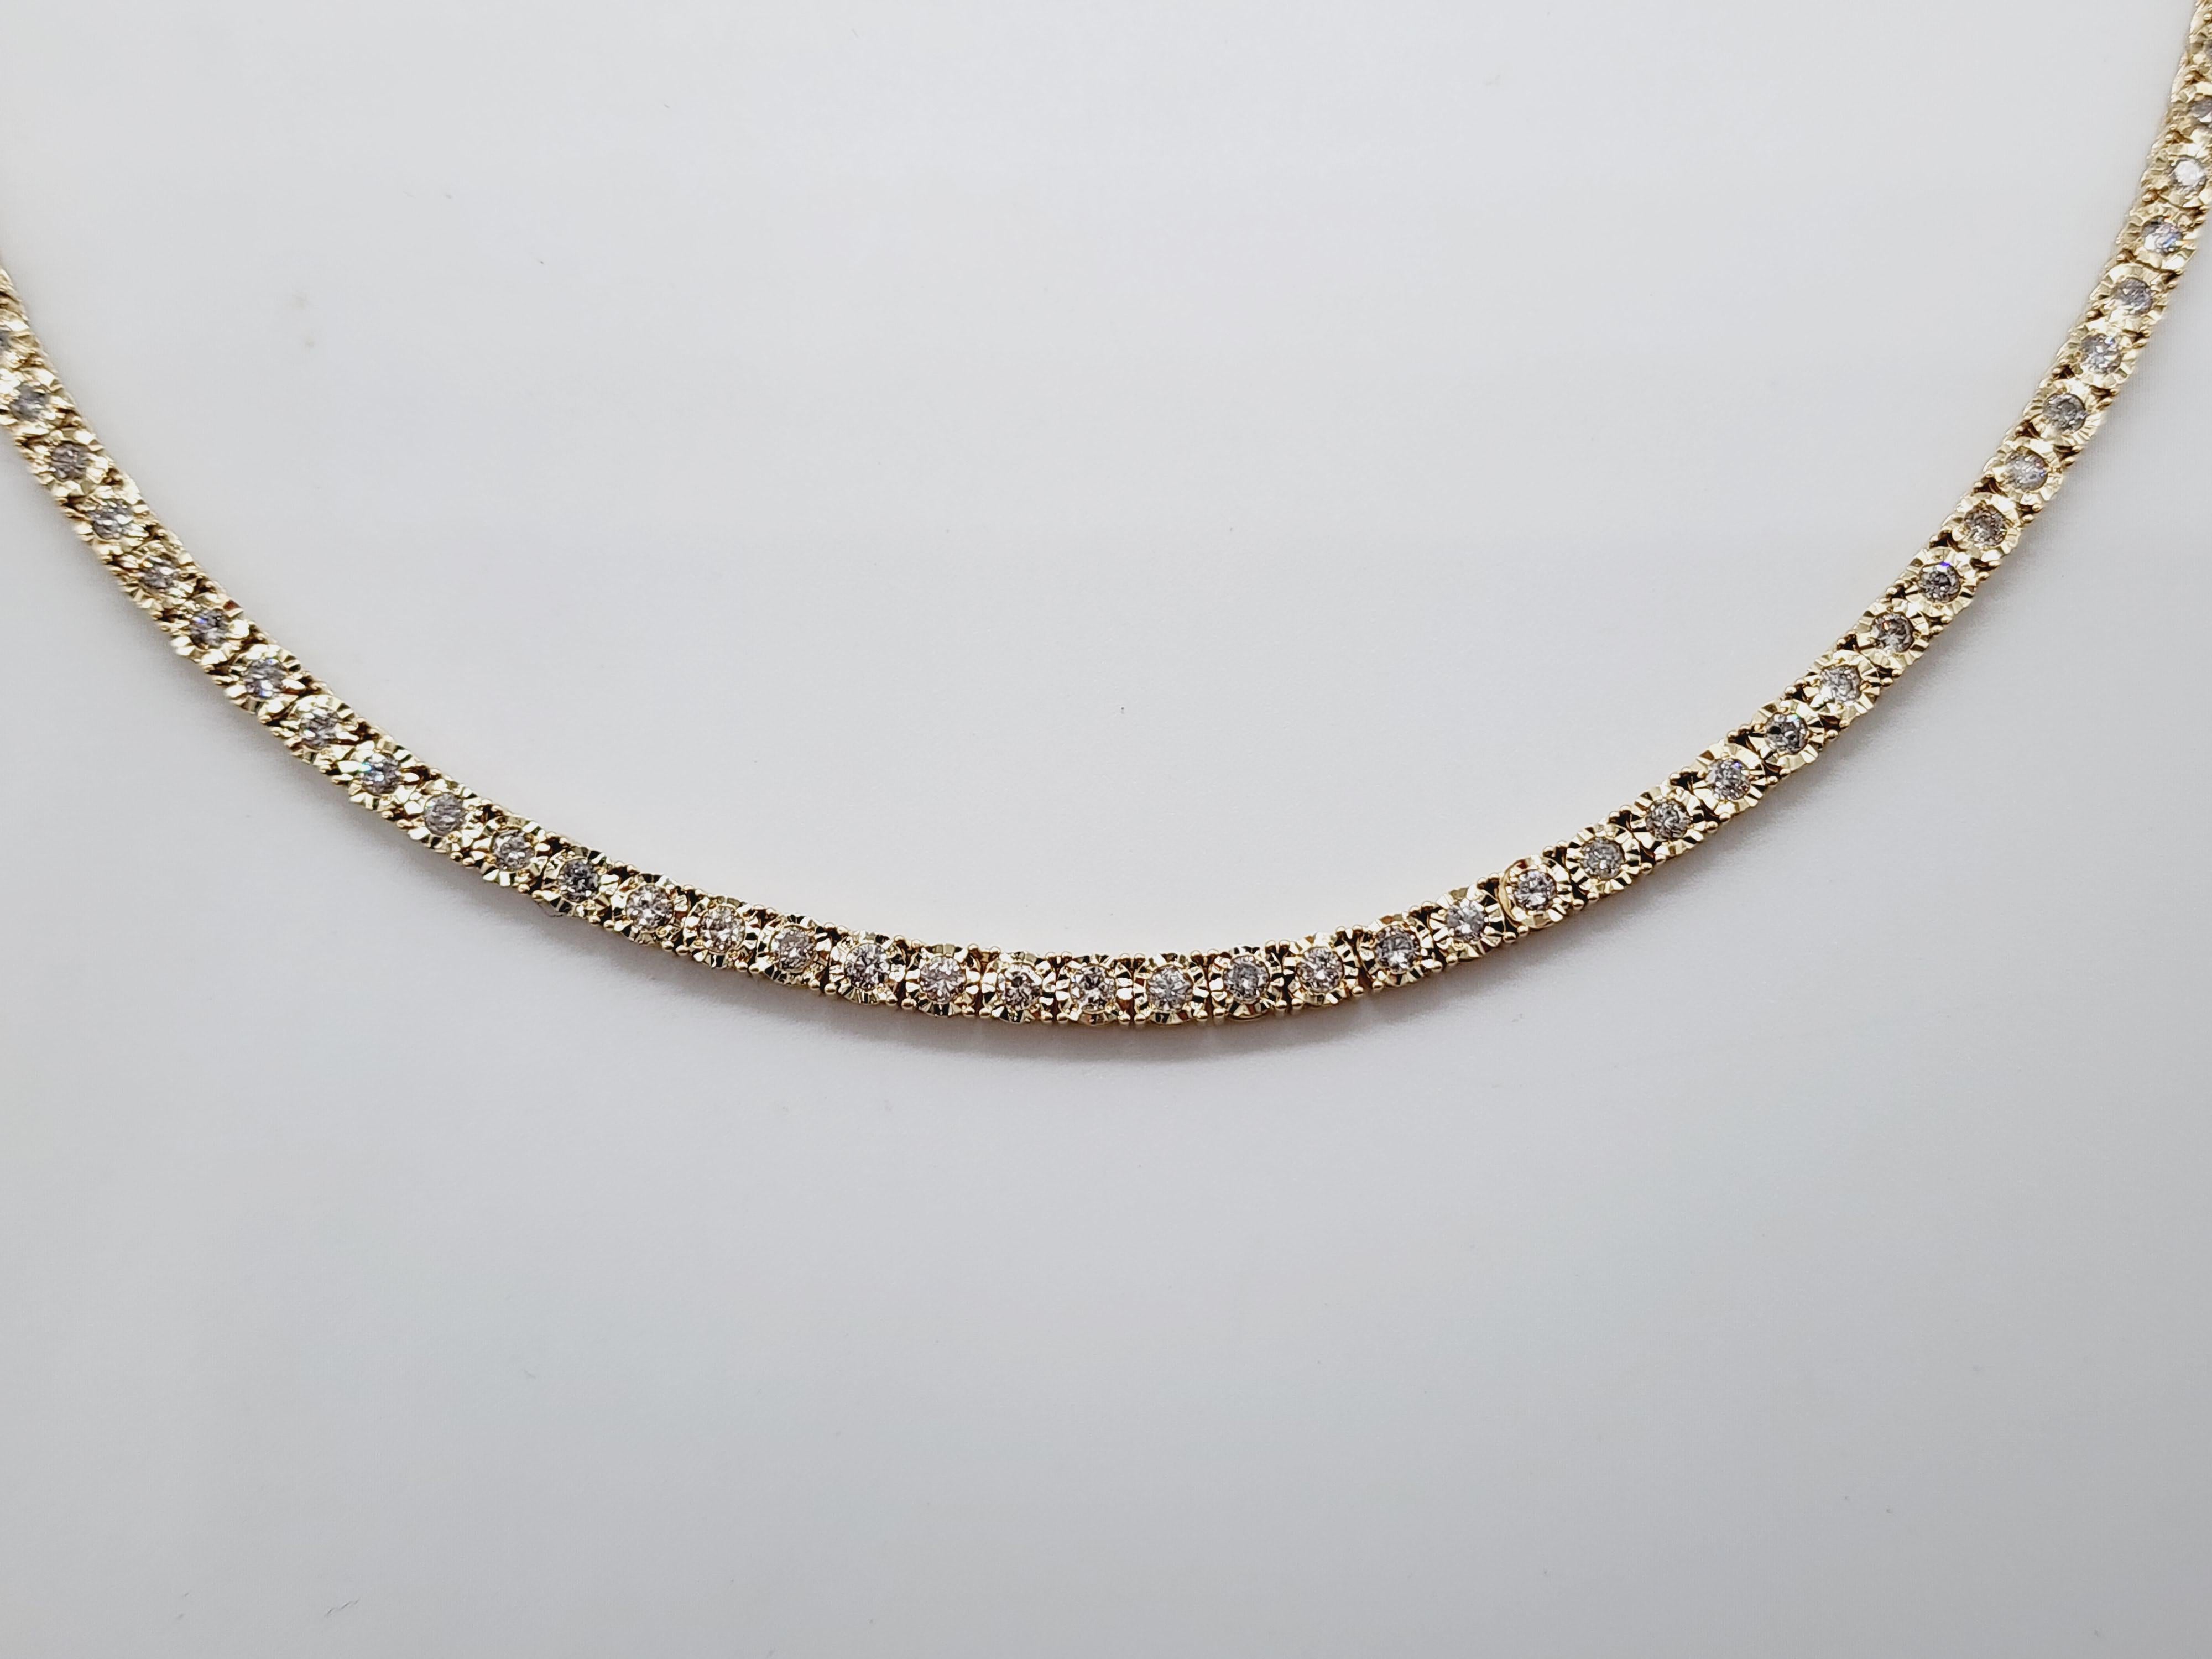 Brilliant and beautiful illusion setting necklace, natural round-brilliant cut white diamonds clean and Excellent shine. 14k yellow gold illusion setting four-prong for maximum light brilliance. 20 inch length. Average F-G Color, SI-I  Clarity.